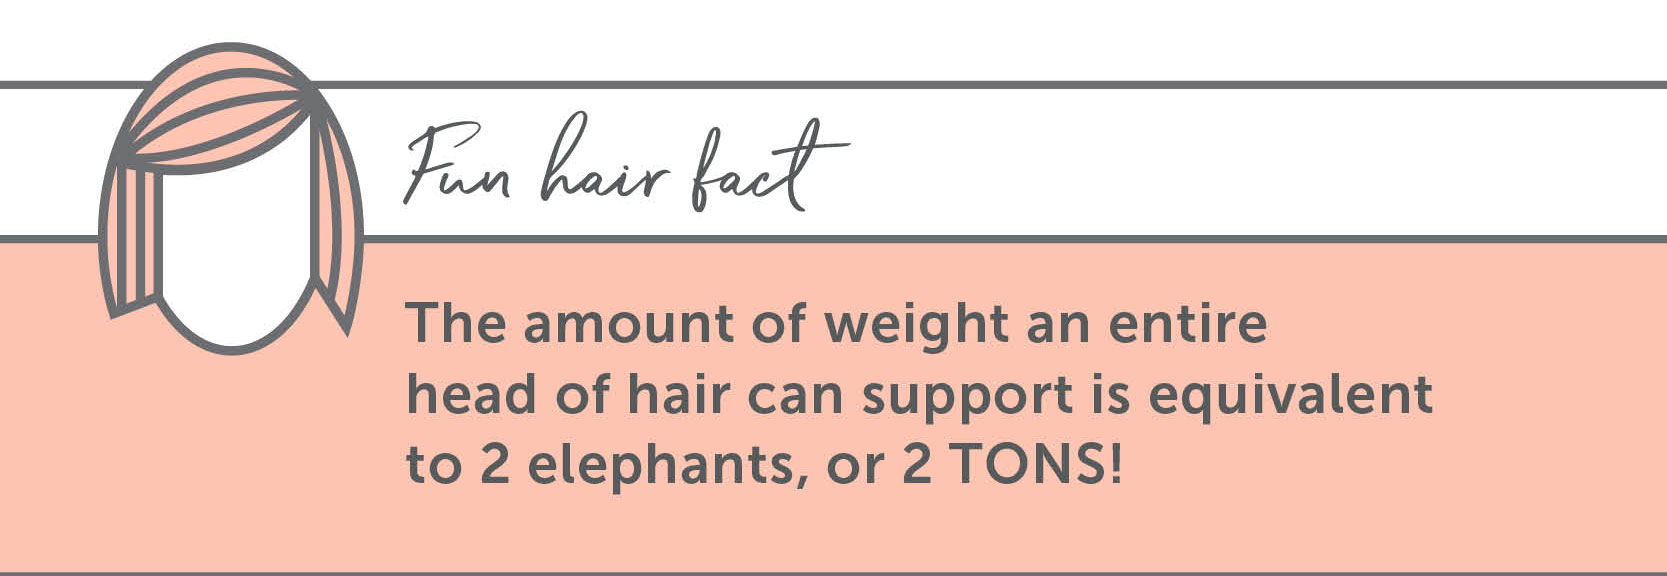 Hair Fun Facts - The amount of weight an entire head of hair can support is equivalent to 2 elephants, or 2 TONS!